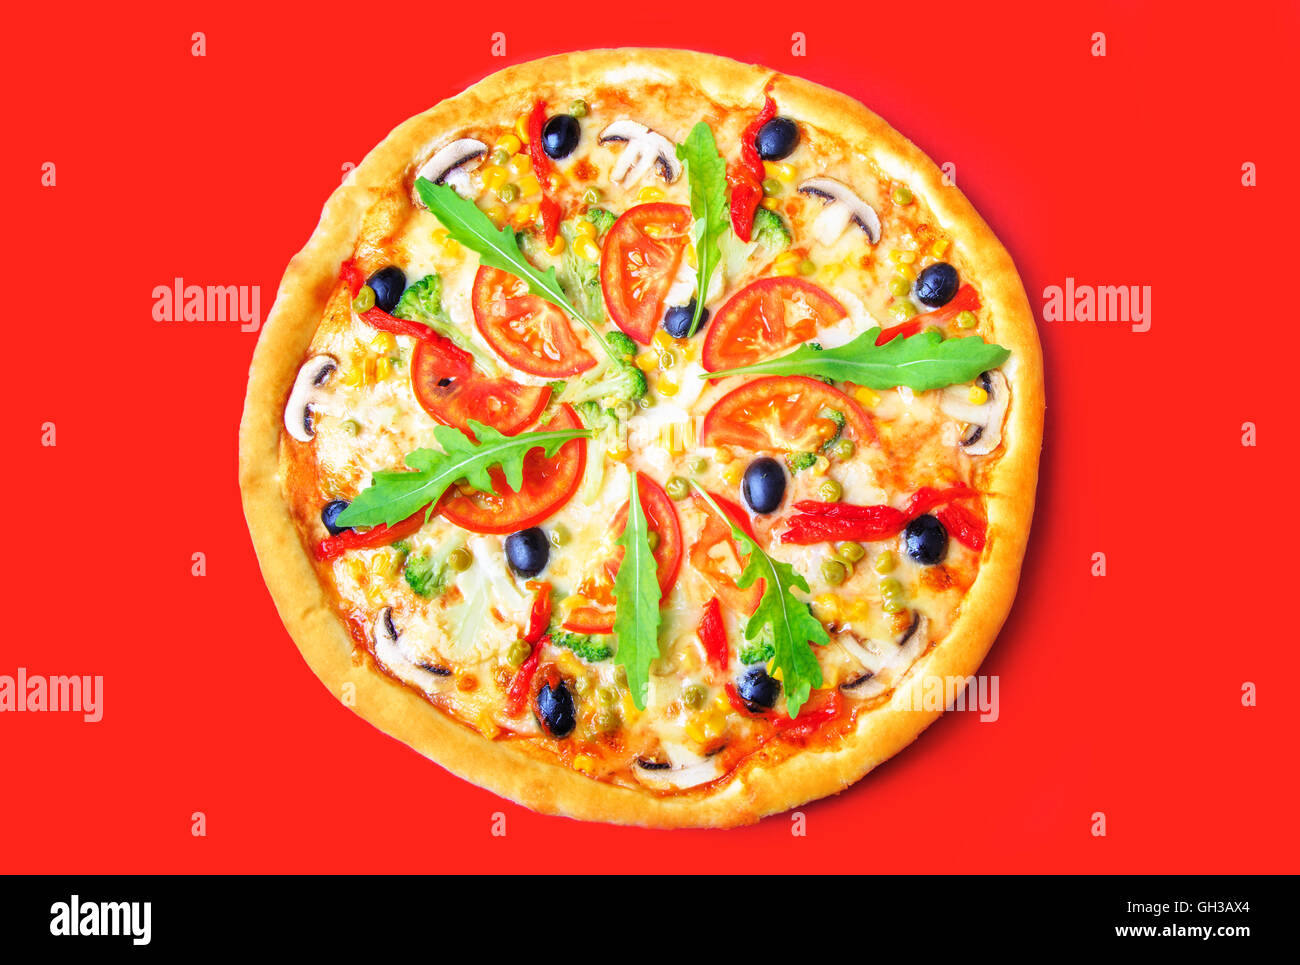 Delicious pizza with vegetables close-up on a red background Stock Photo